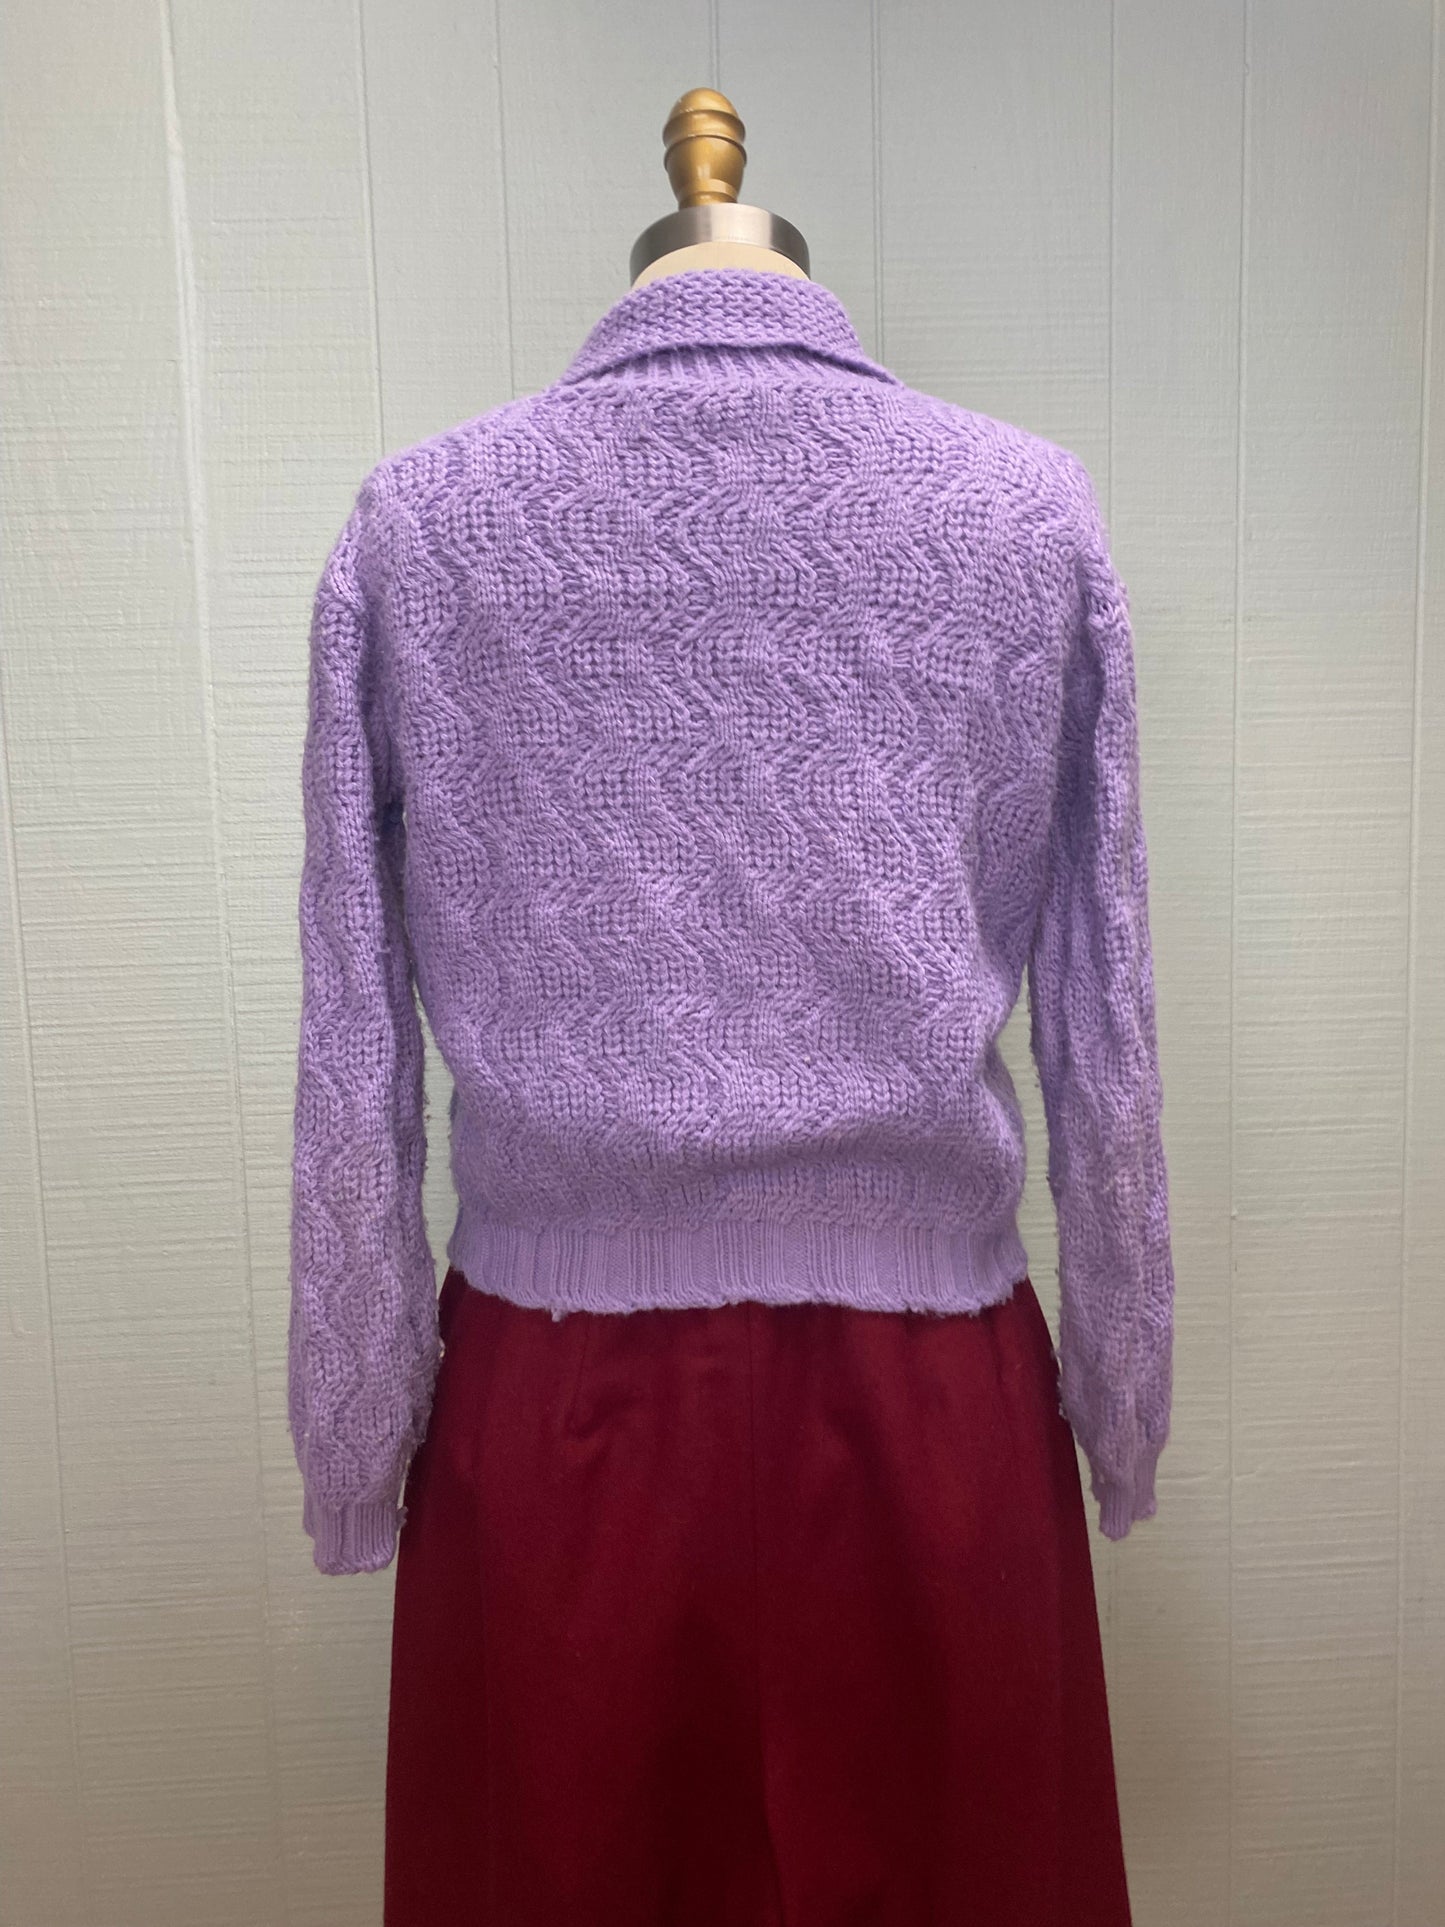 50's 60's Lavender Wavy Knit Collared Cardigan